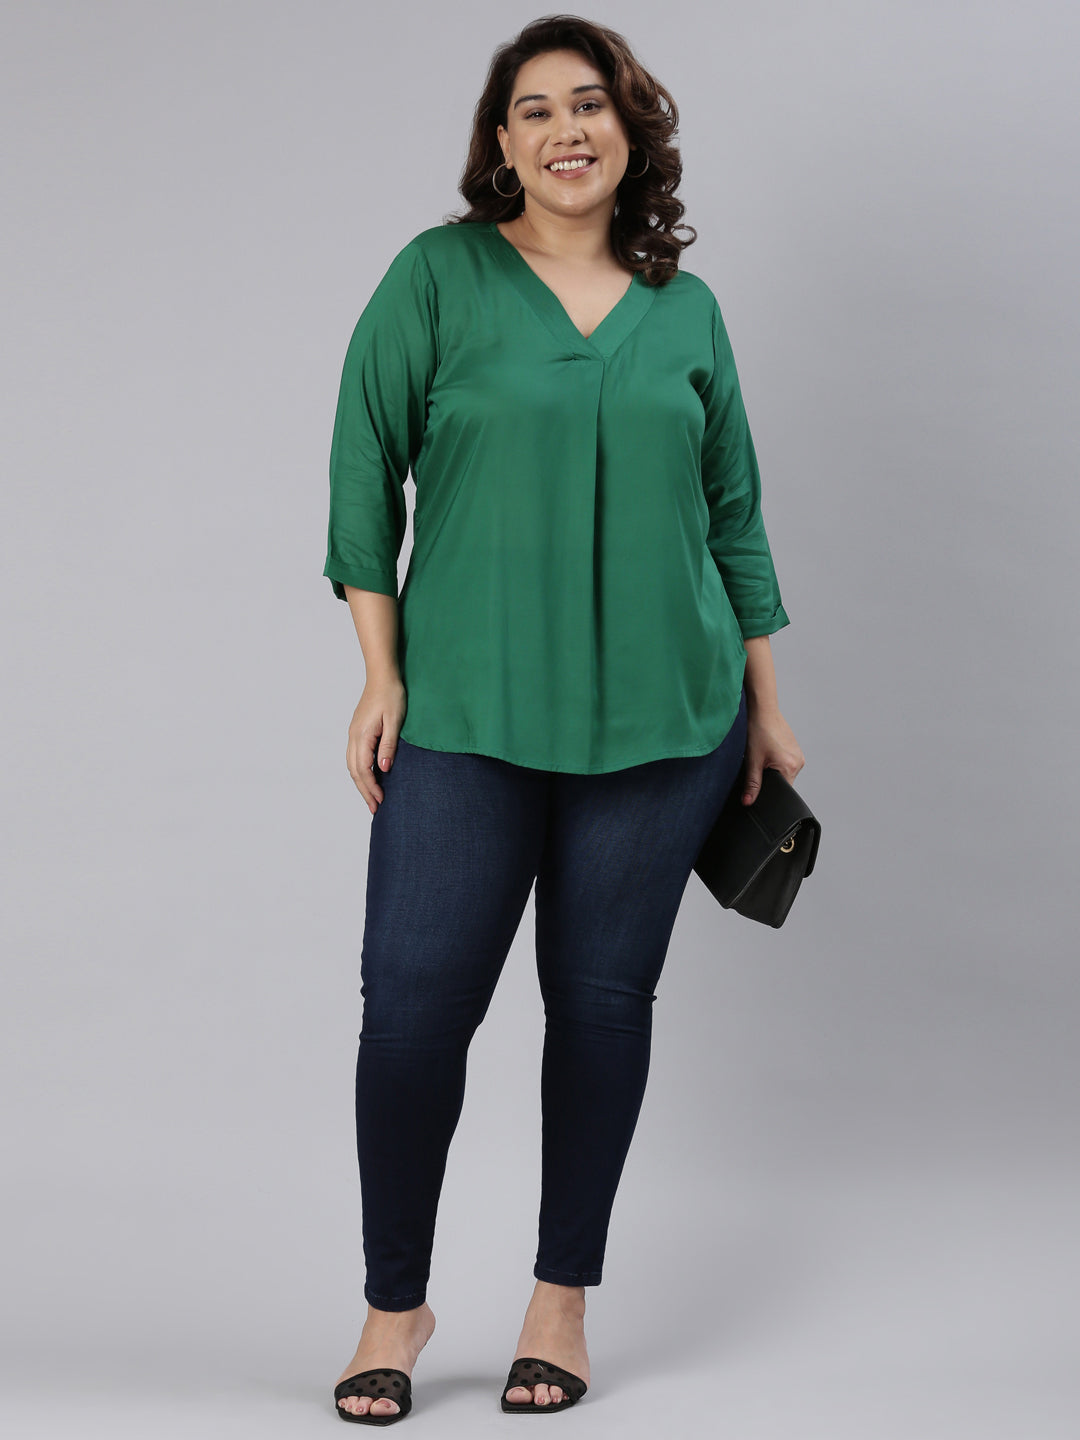 SOLID GREEN MODAL TOP